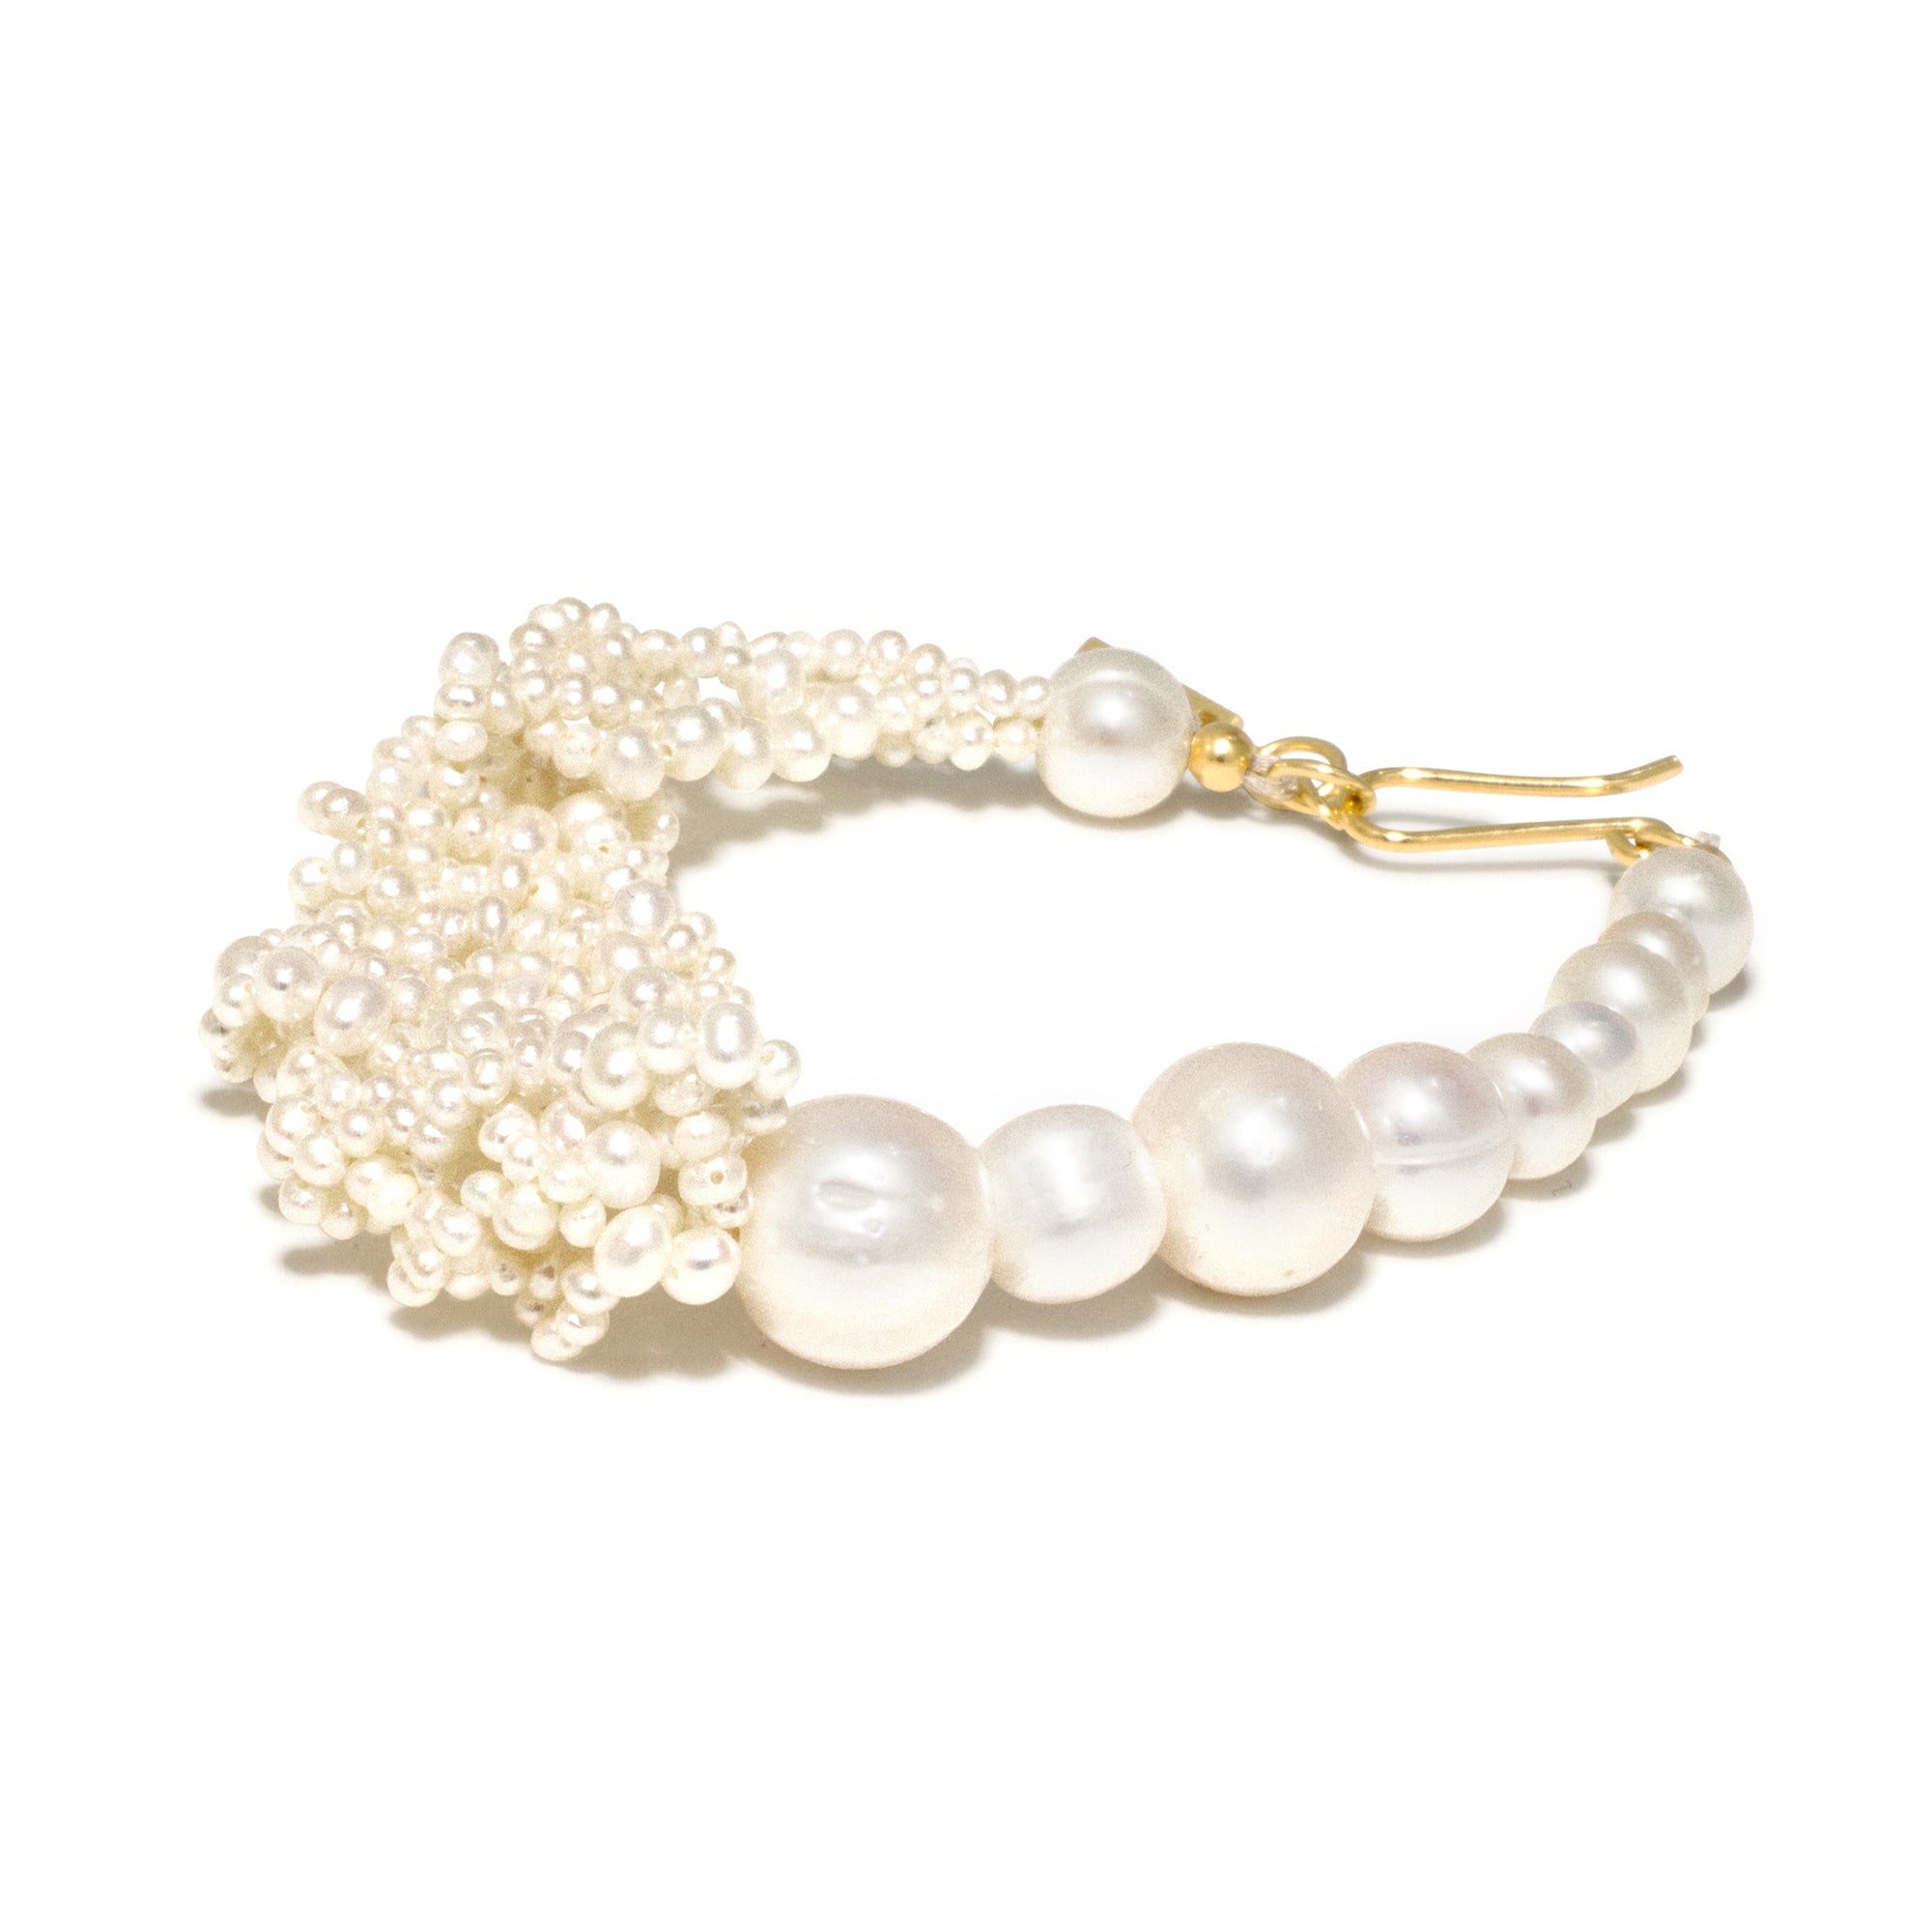 Completedworks - Women's Parade of Possibilities Bracelet - (Pearl) view 2